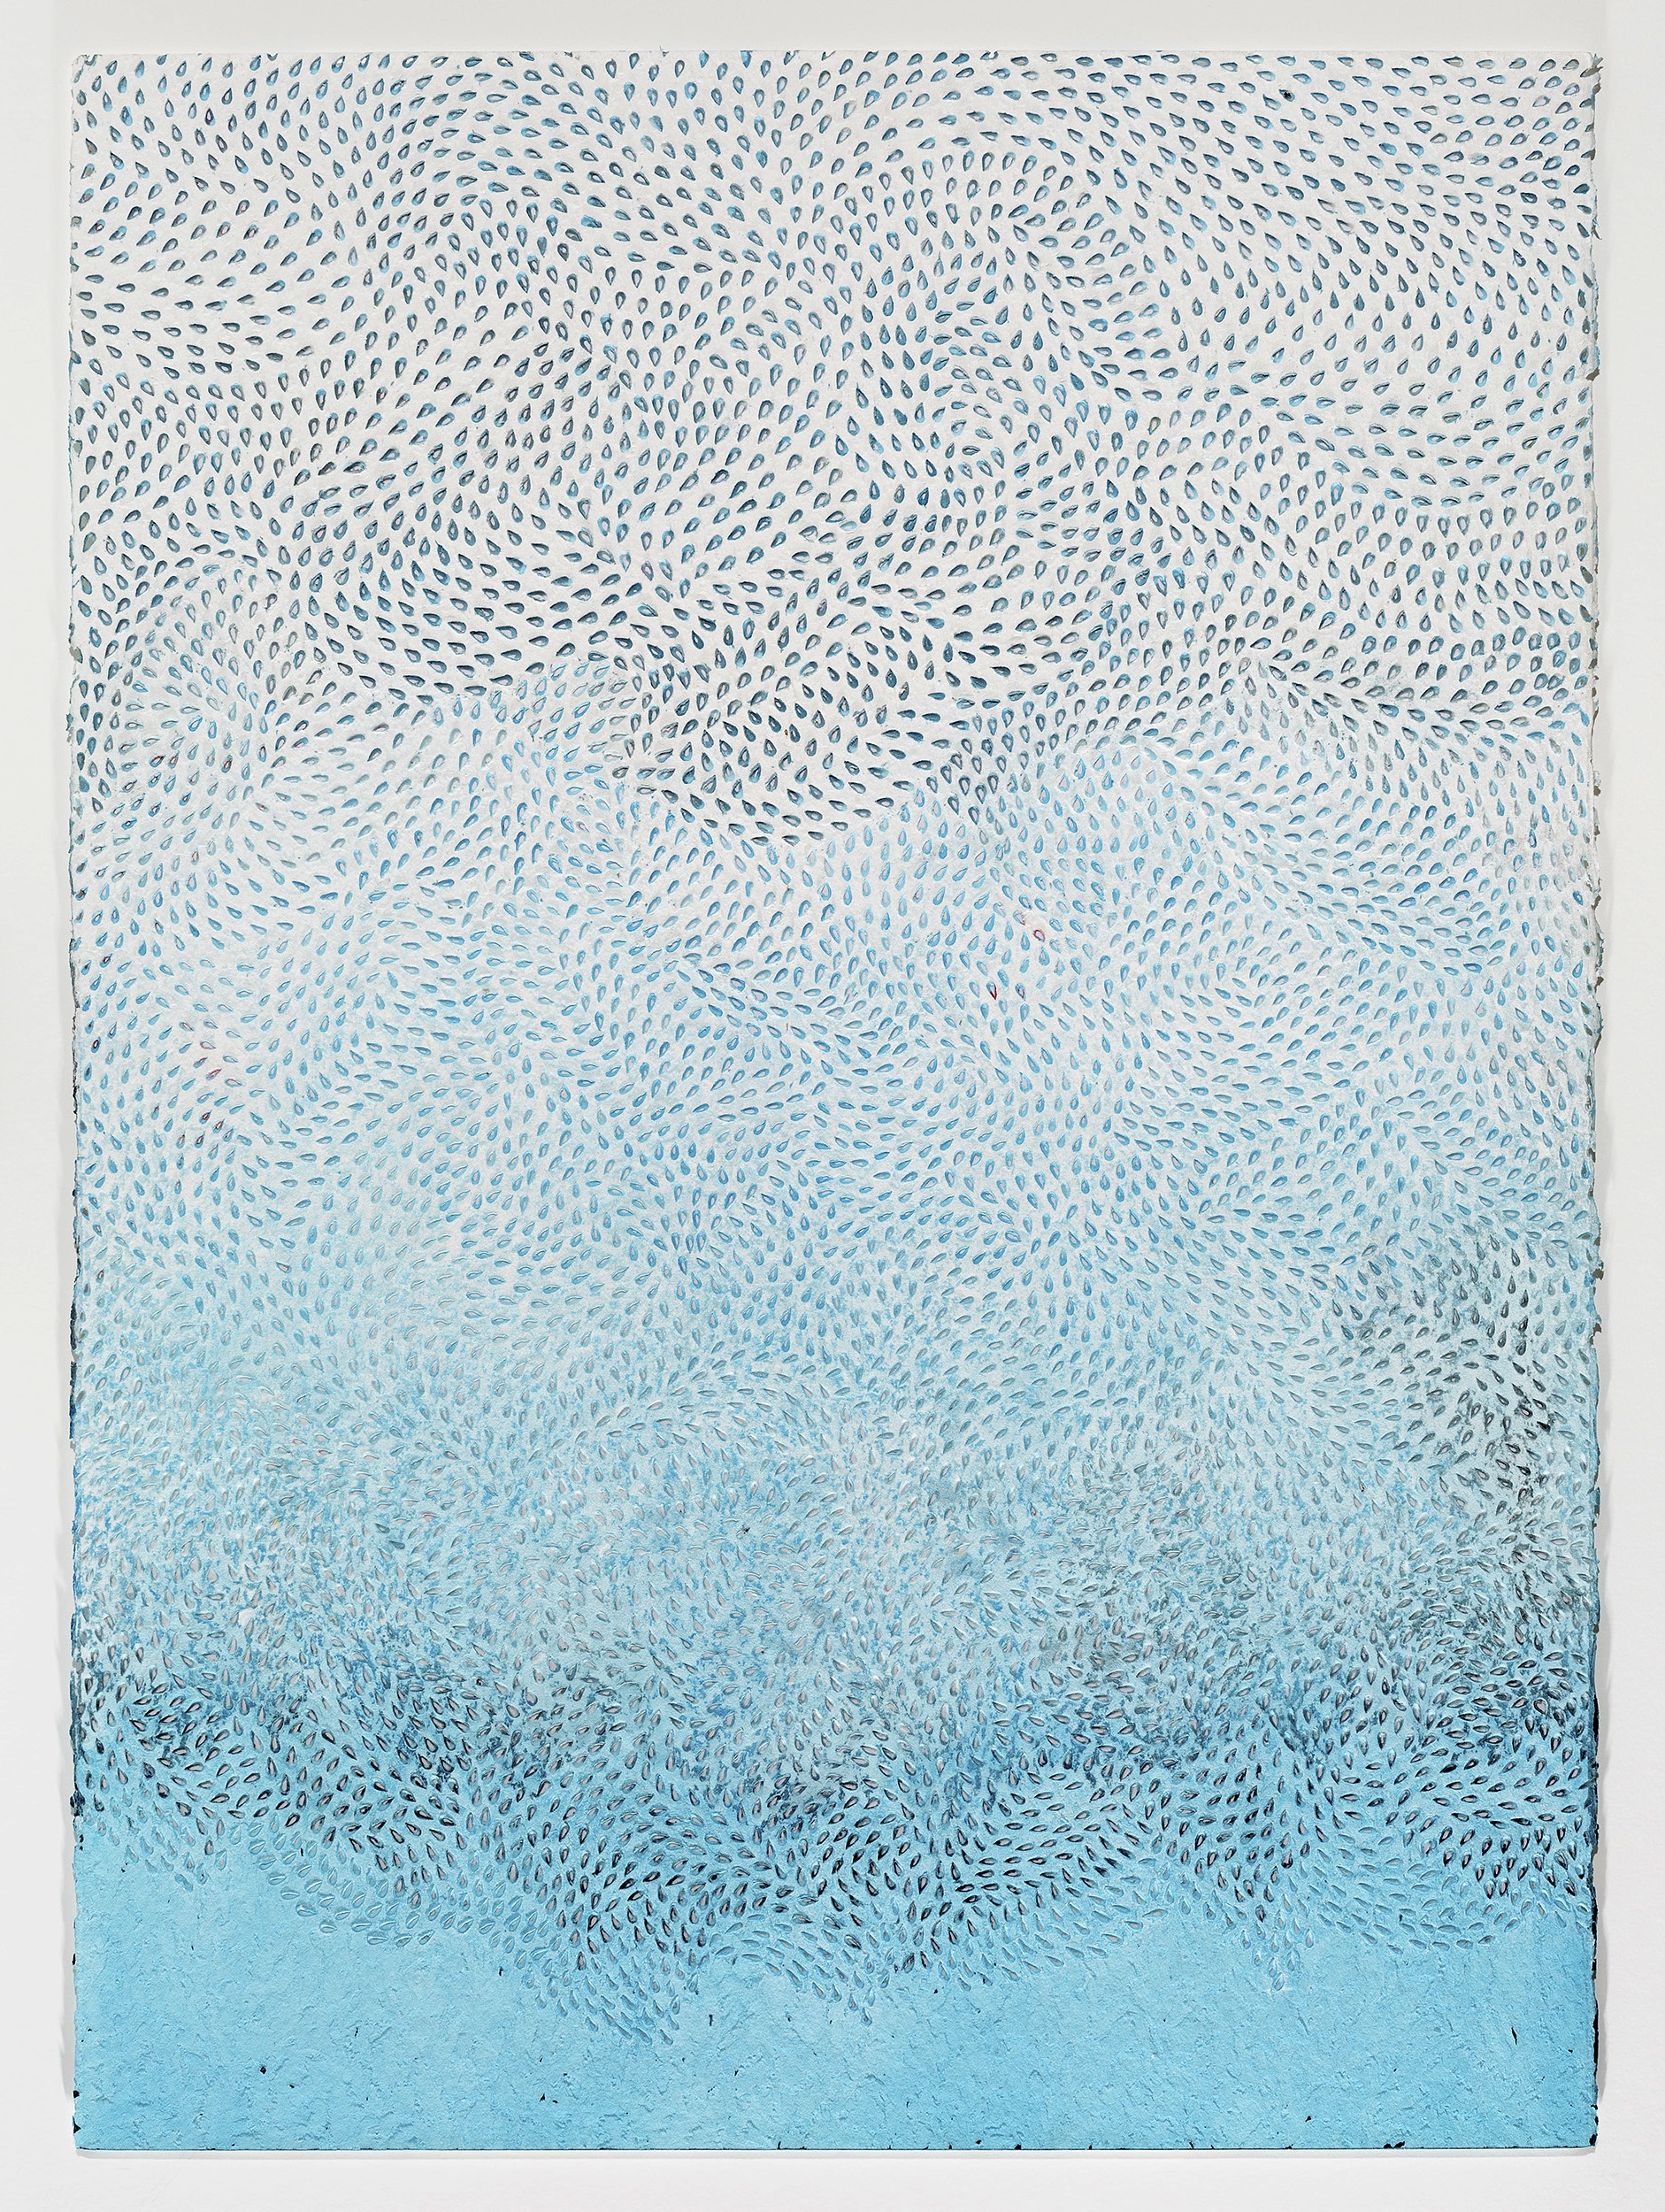 Schawel_Tidal_Flow_2021_ink_on_torn_perforated_paper_105x75cm